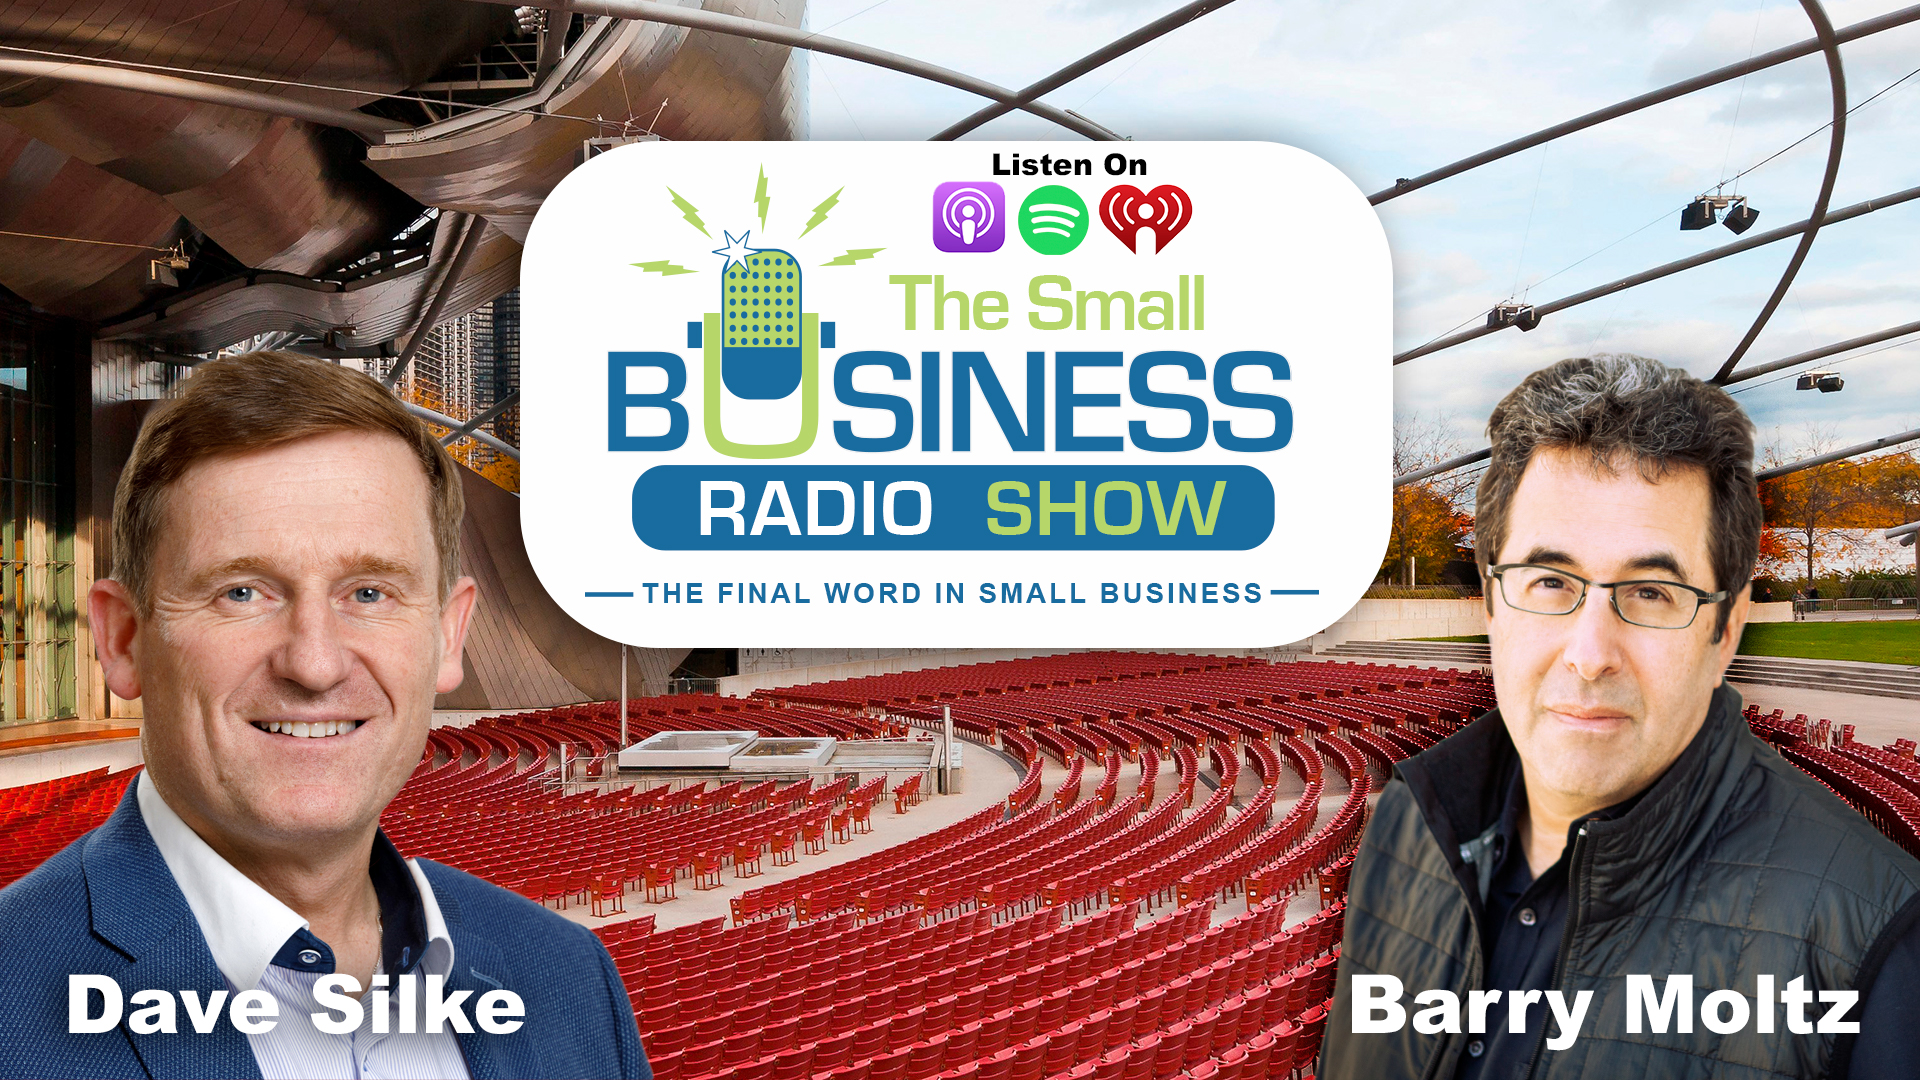 Dave Silke on The Small Business Radio Show